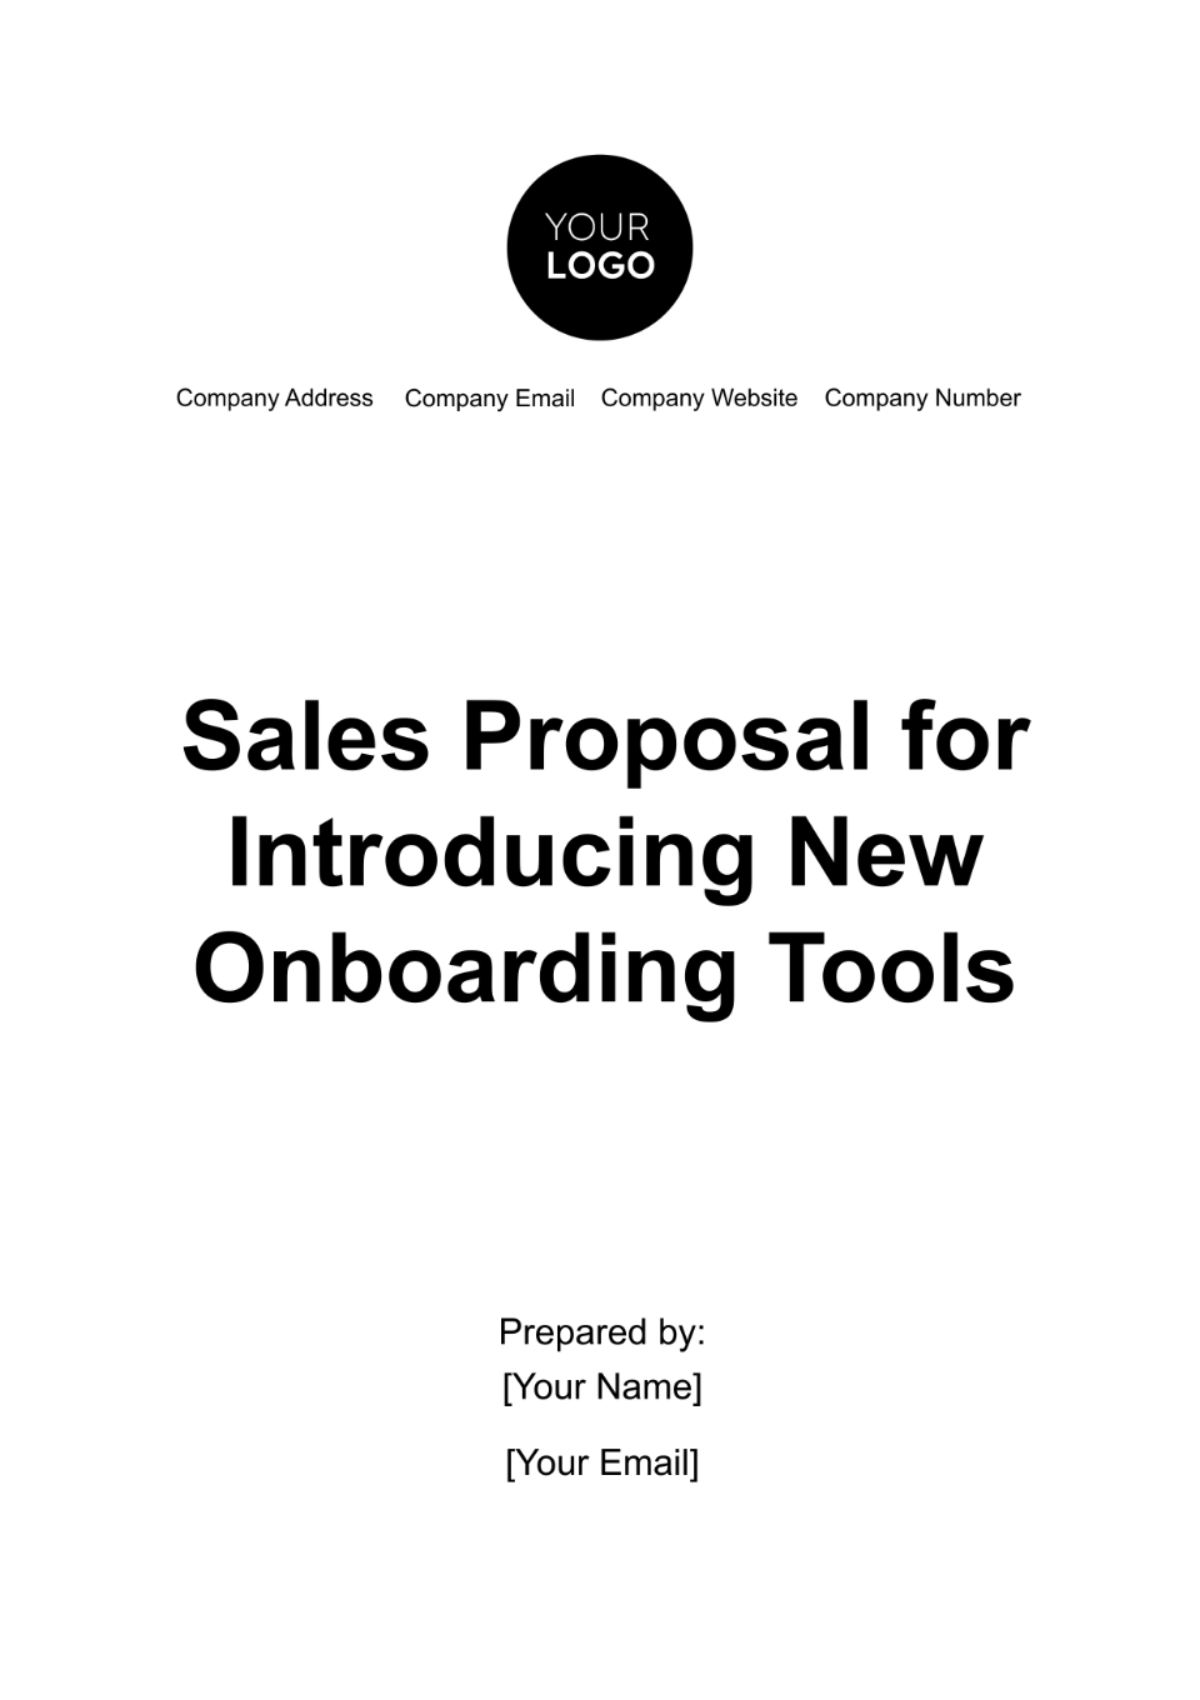 Sales Proposal for Introducing New Onboarding Tools Template